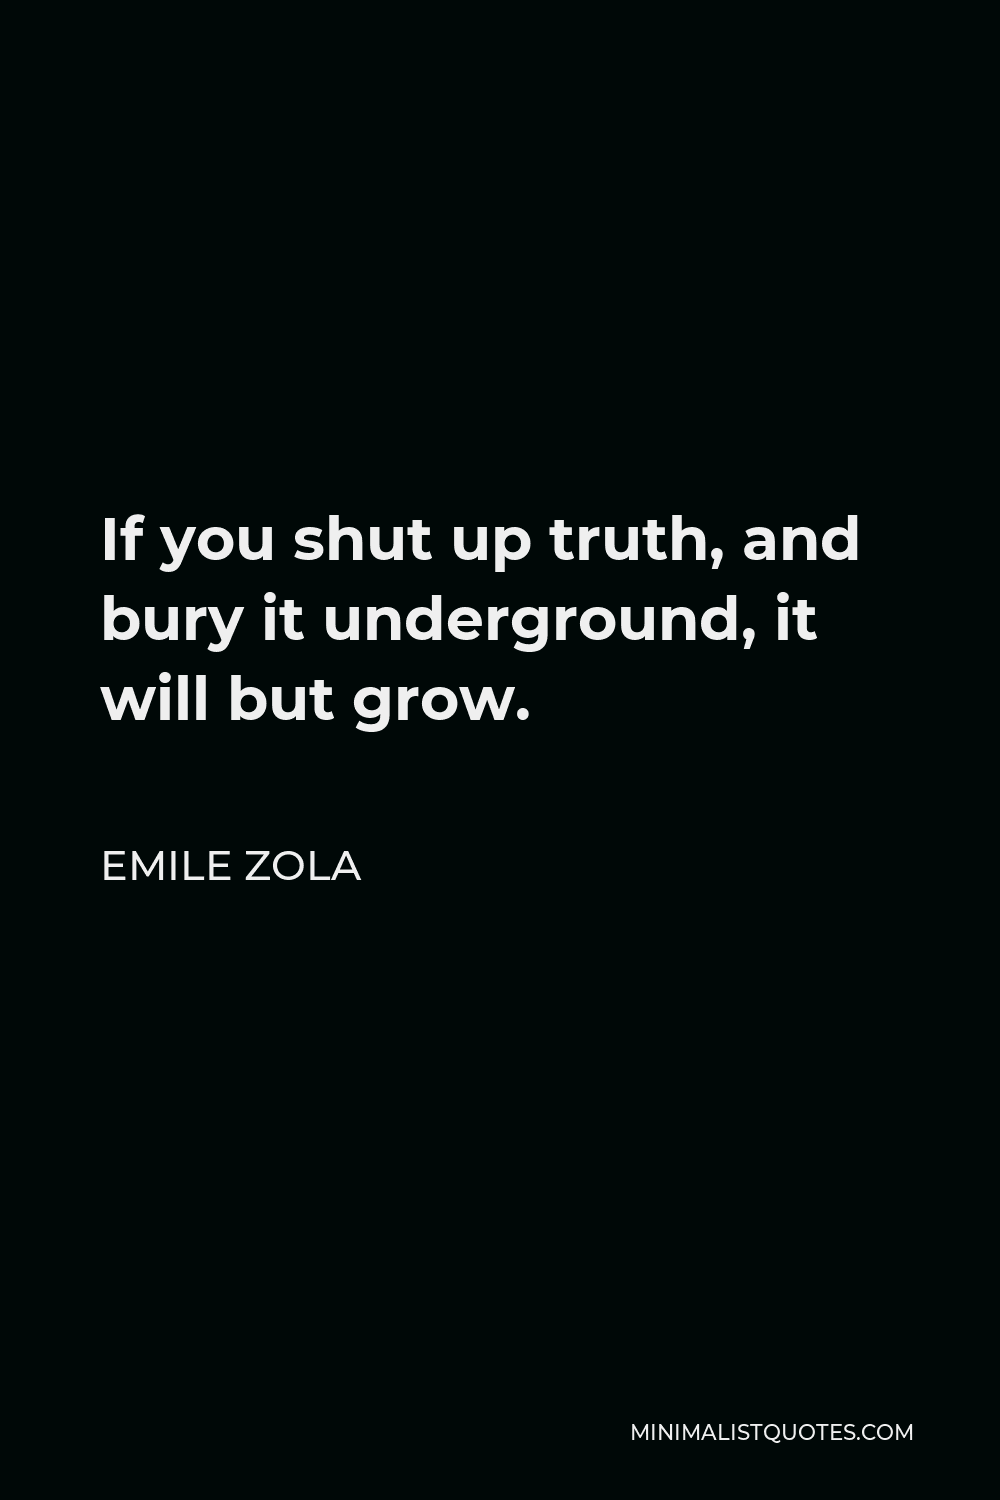 Emile Zola Quote - If you shut up truth, and bury it underground, it will but grow.